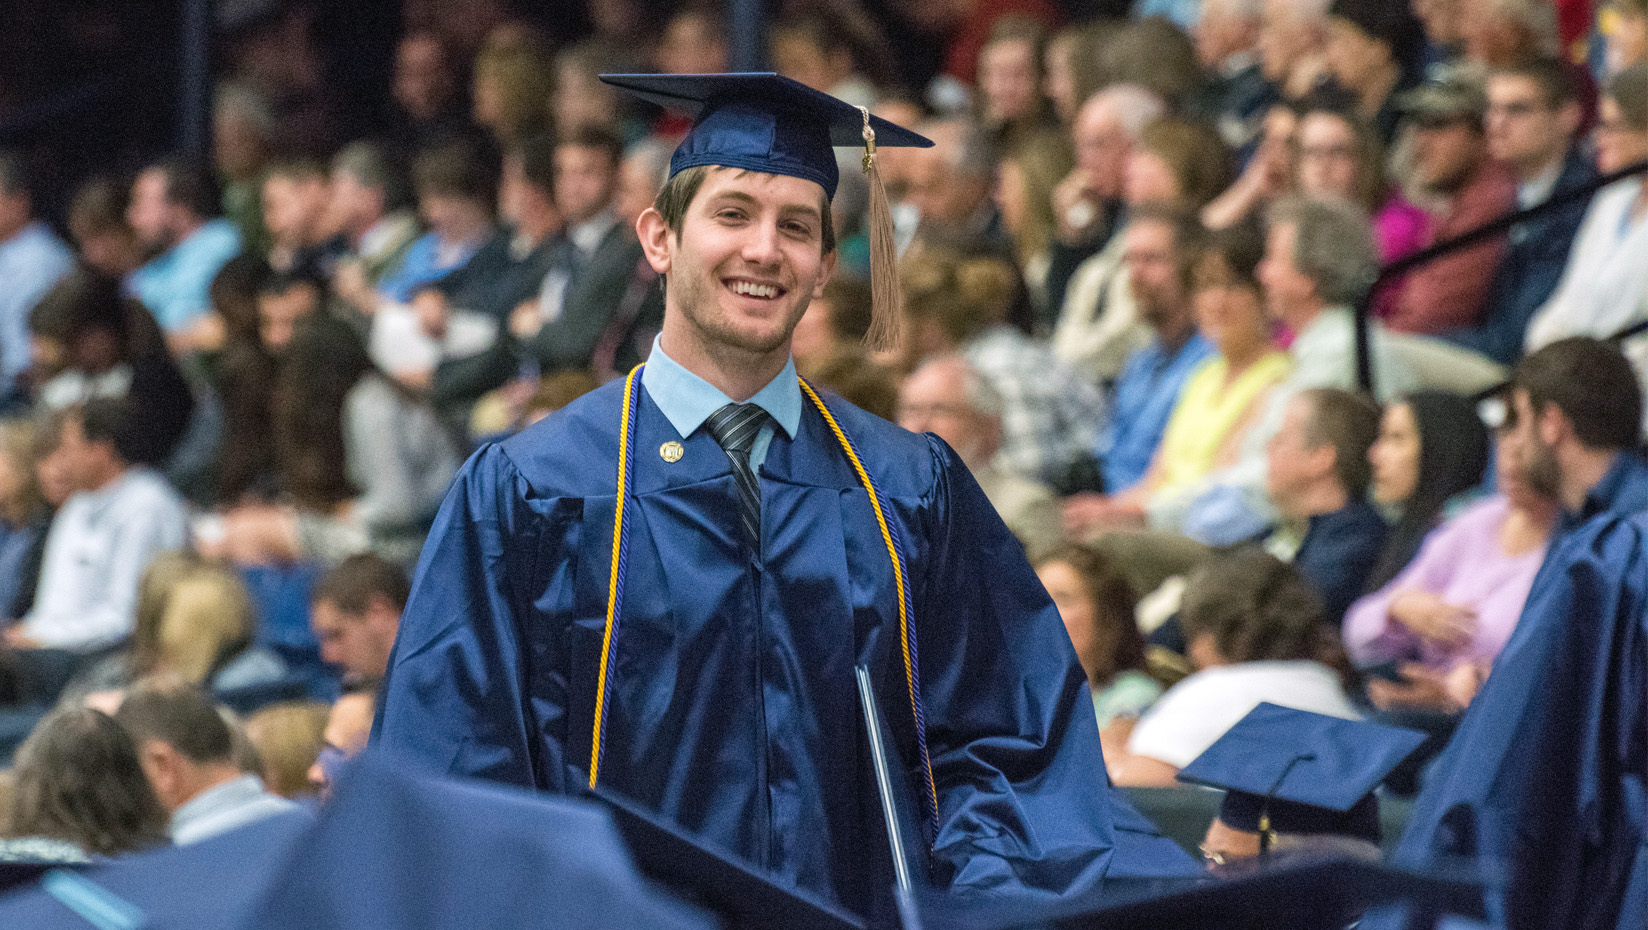 UMaine student in cap and gown at Commencement